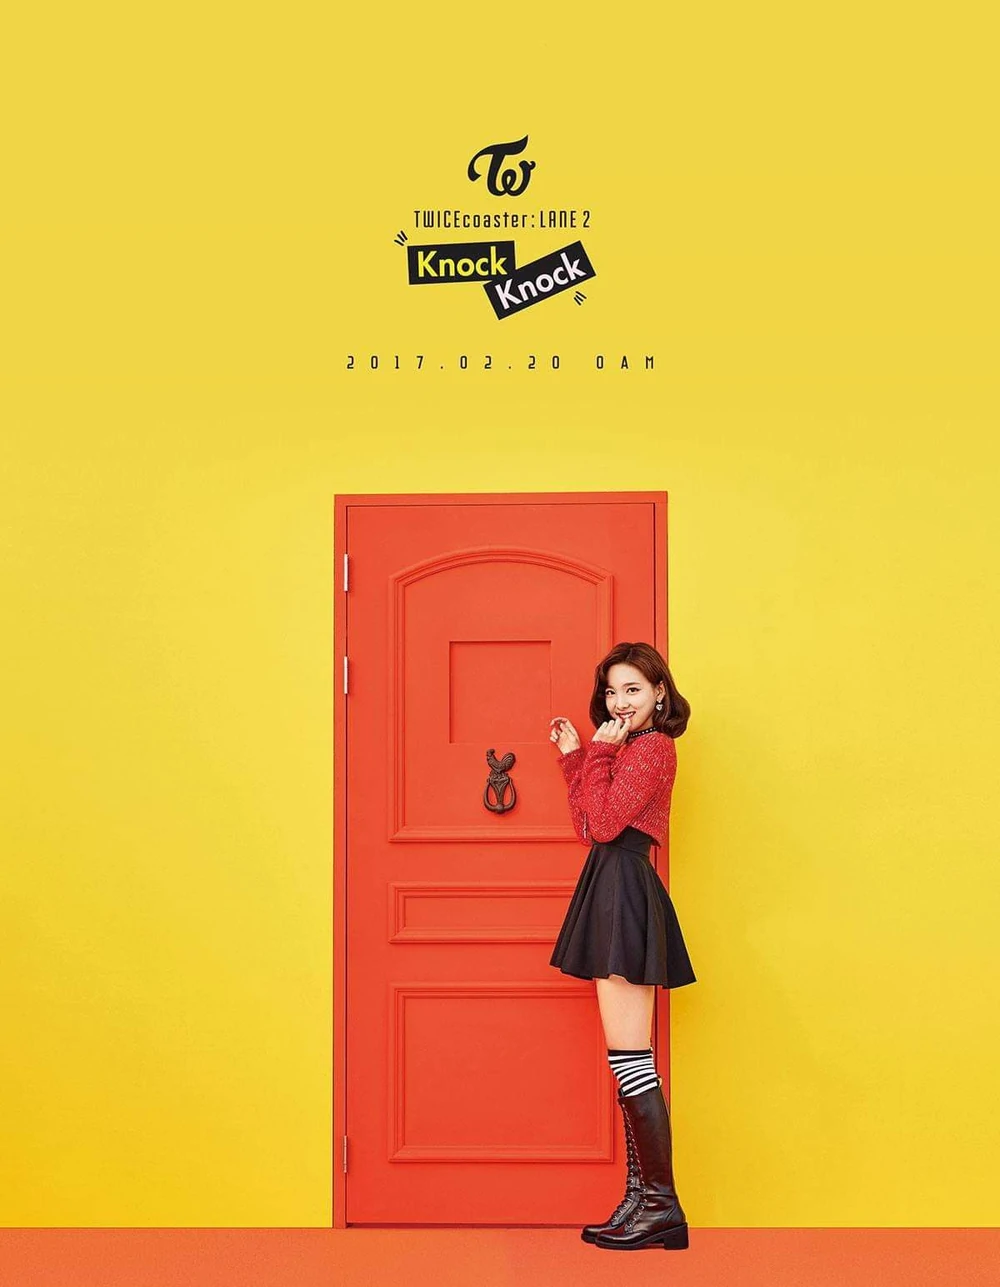 Twice Twicecoaster: Lane 2 Nayeon Concept Teaser Picture Image Photo Kpop K-Concept 2